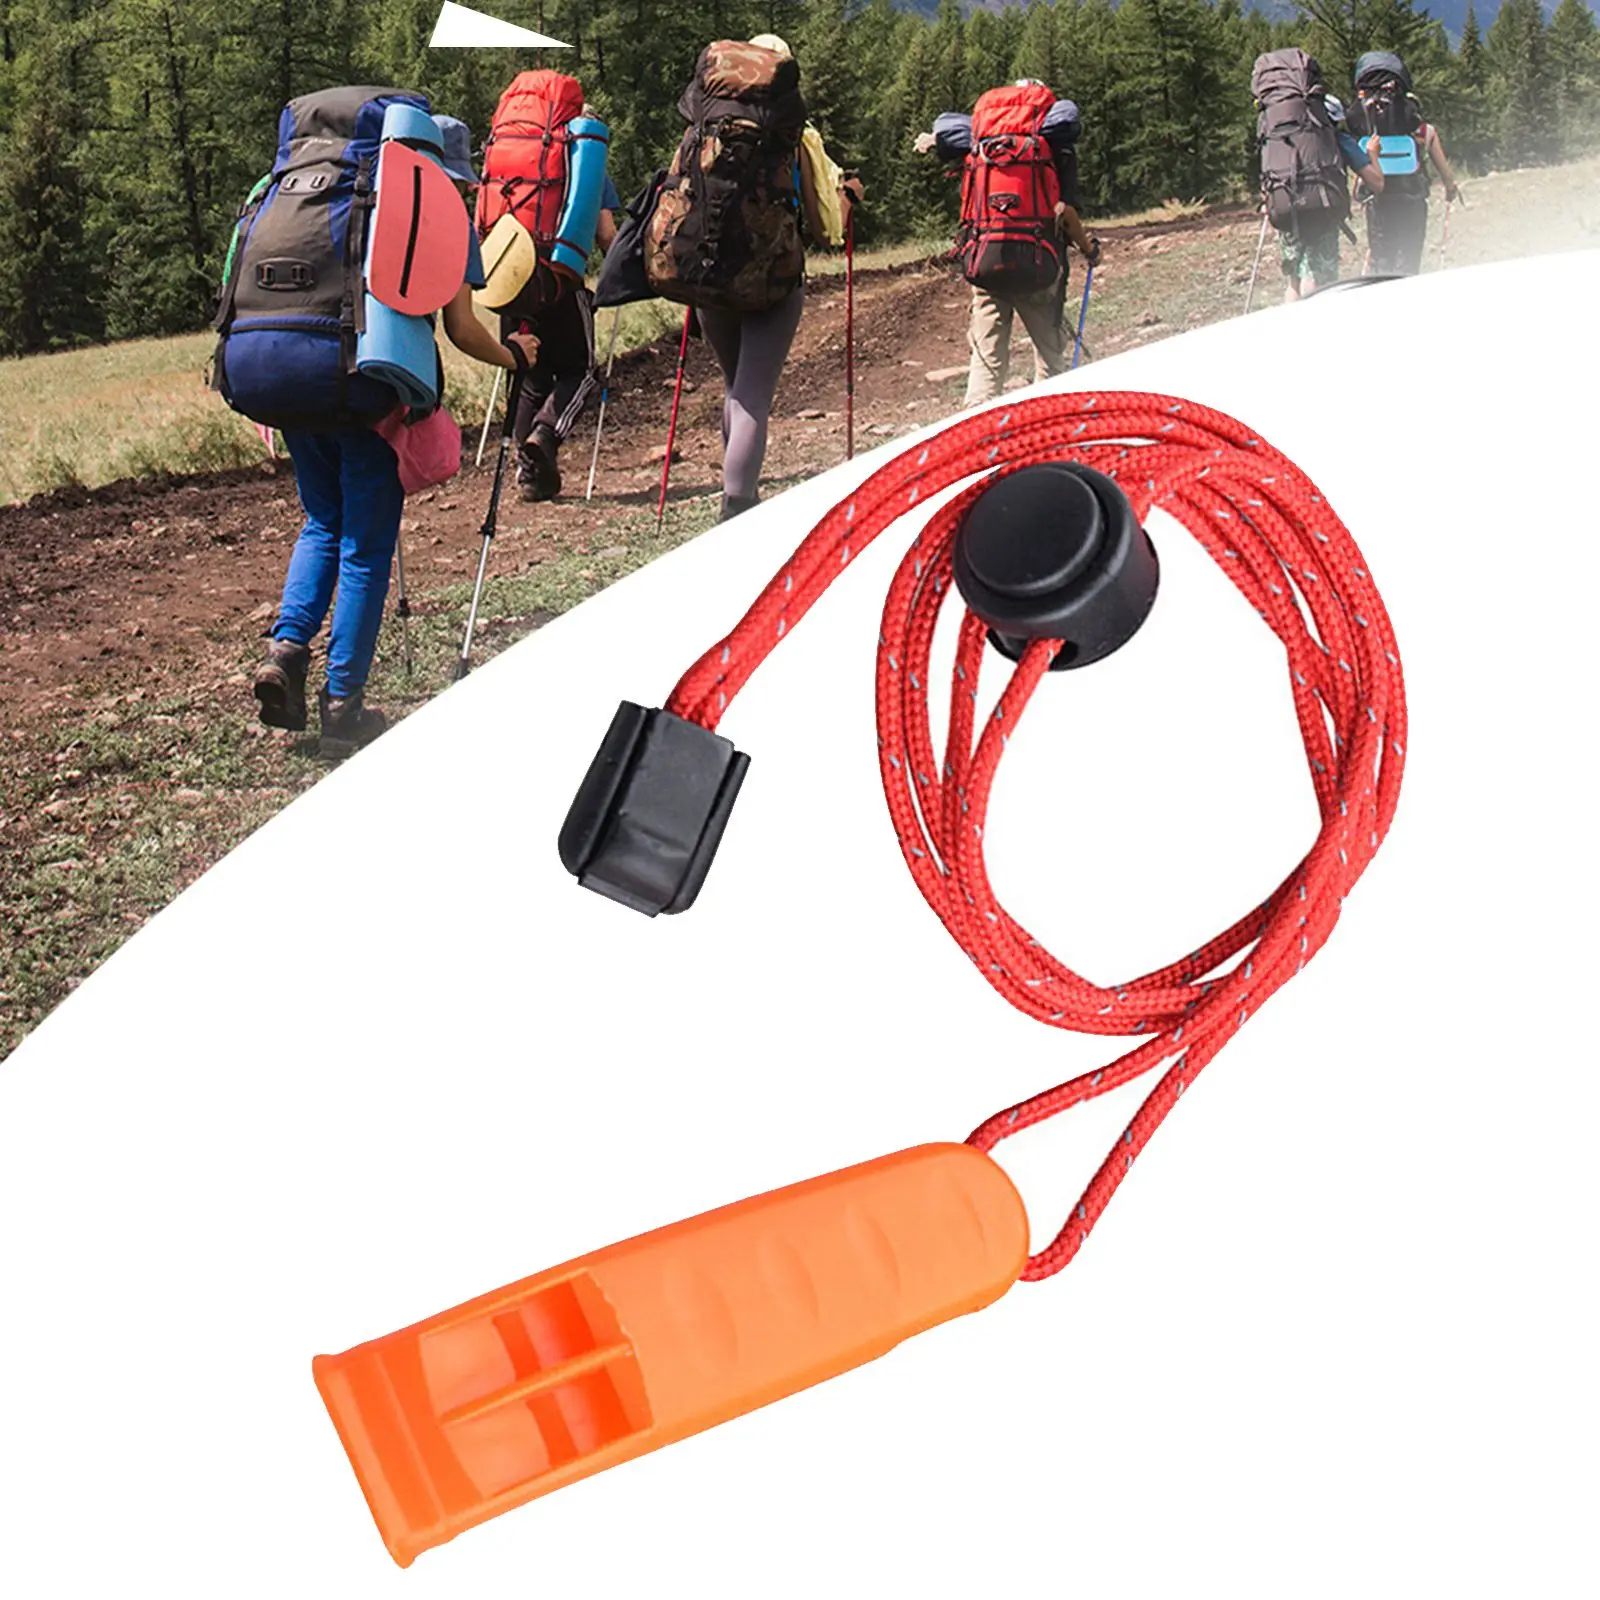 

Camping Double Pipe Plastic Safety Survival Whistles Rescue Emergency Marine Whistle With Adjustable Reflective Lanyard